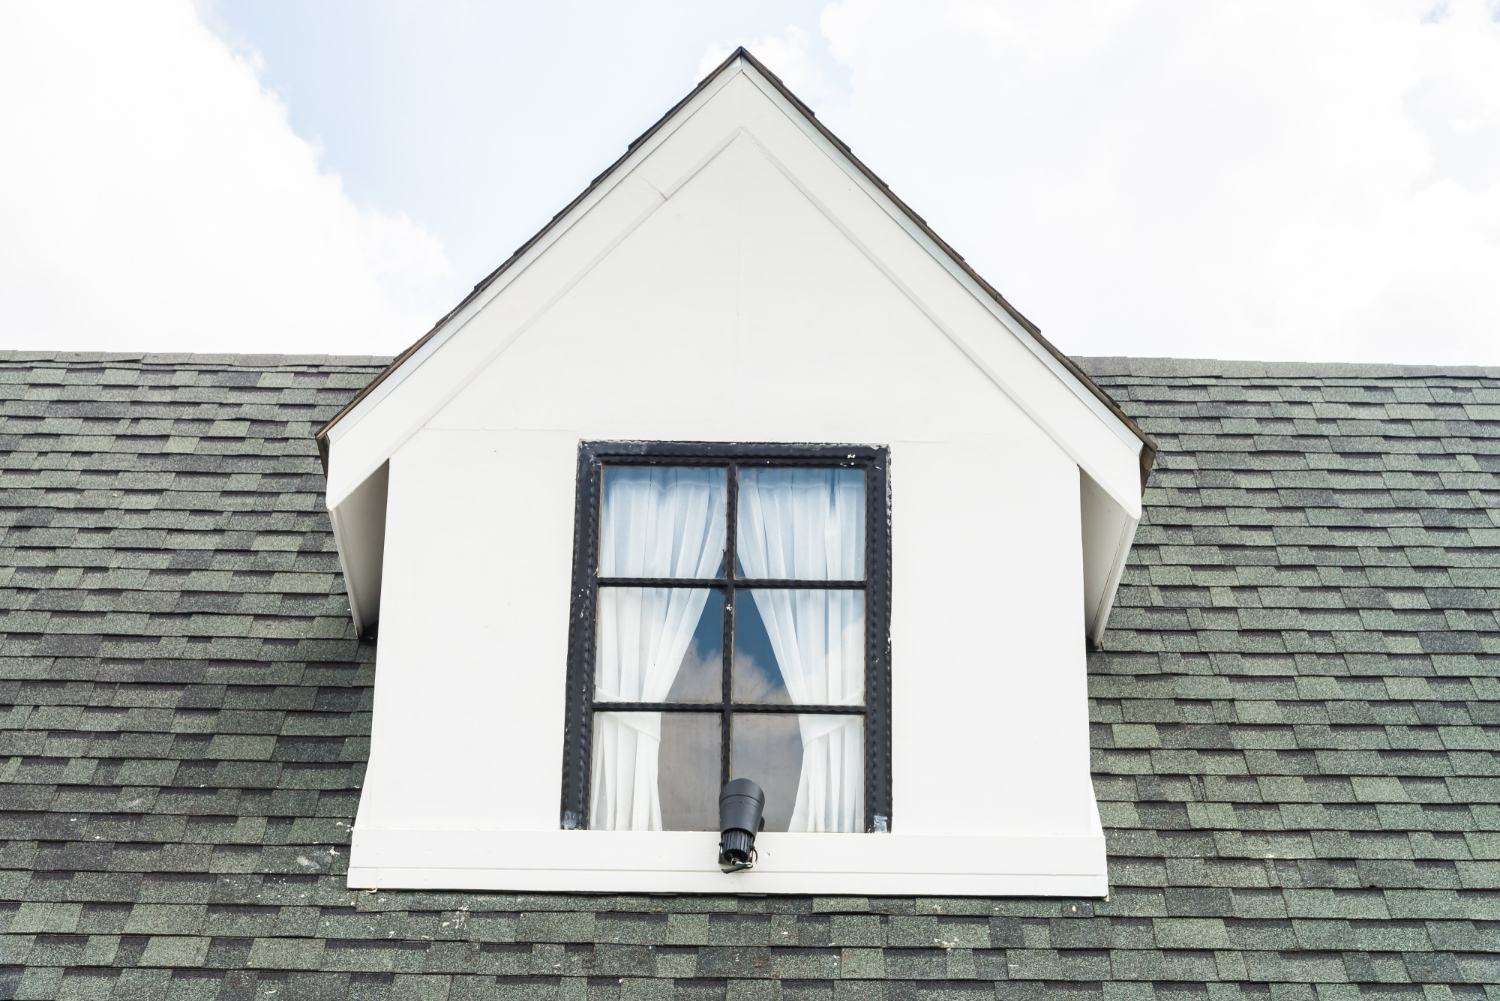 Roofer of Marblehead - Expert Roofing Services in Marblehead, MA​